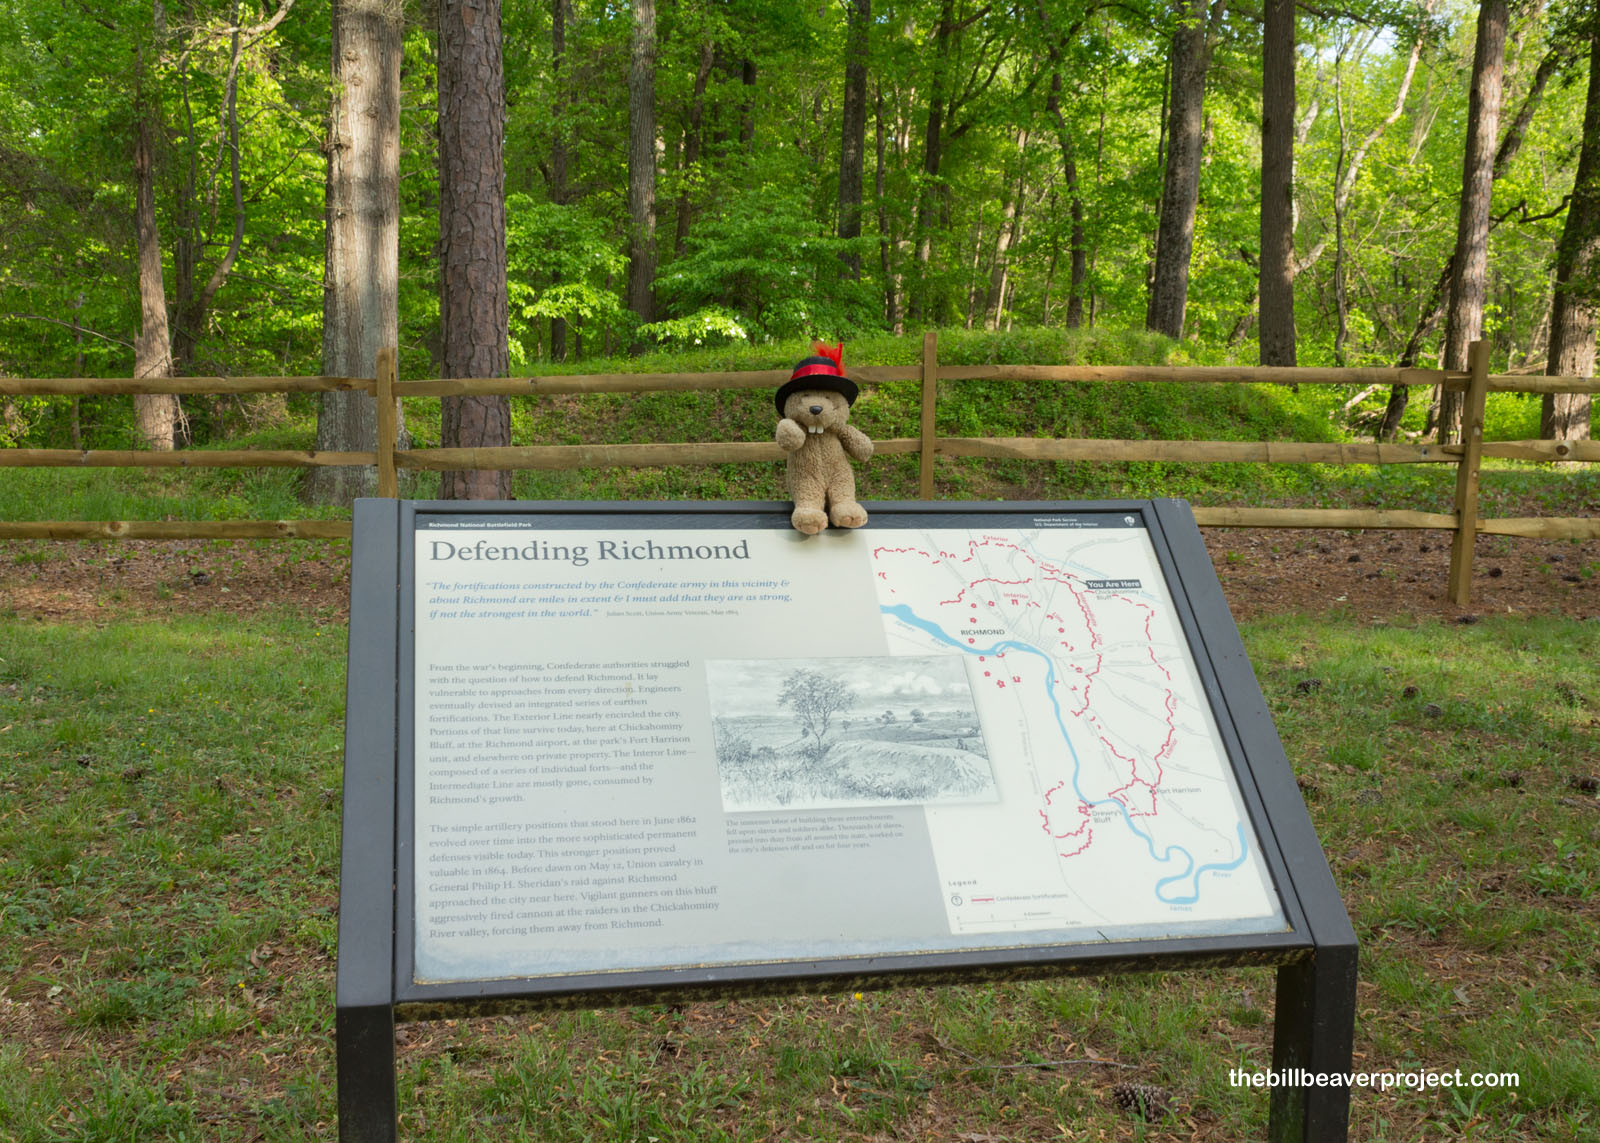 The defenses at Chickahominy Bluff!